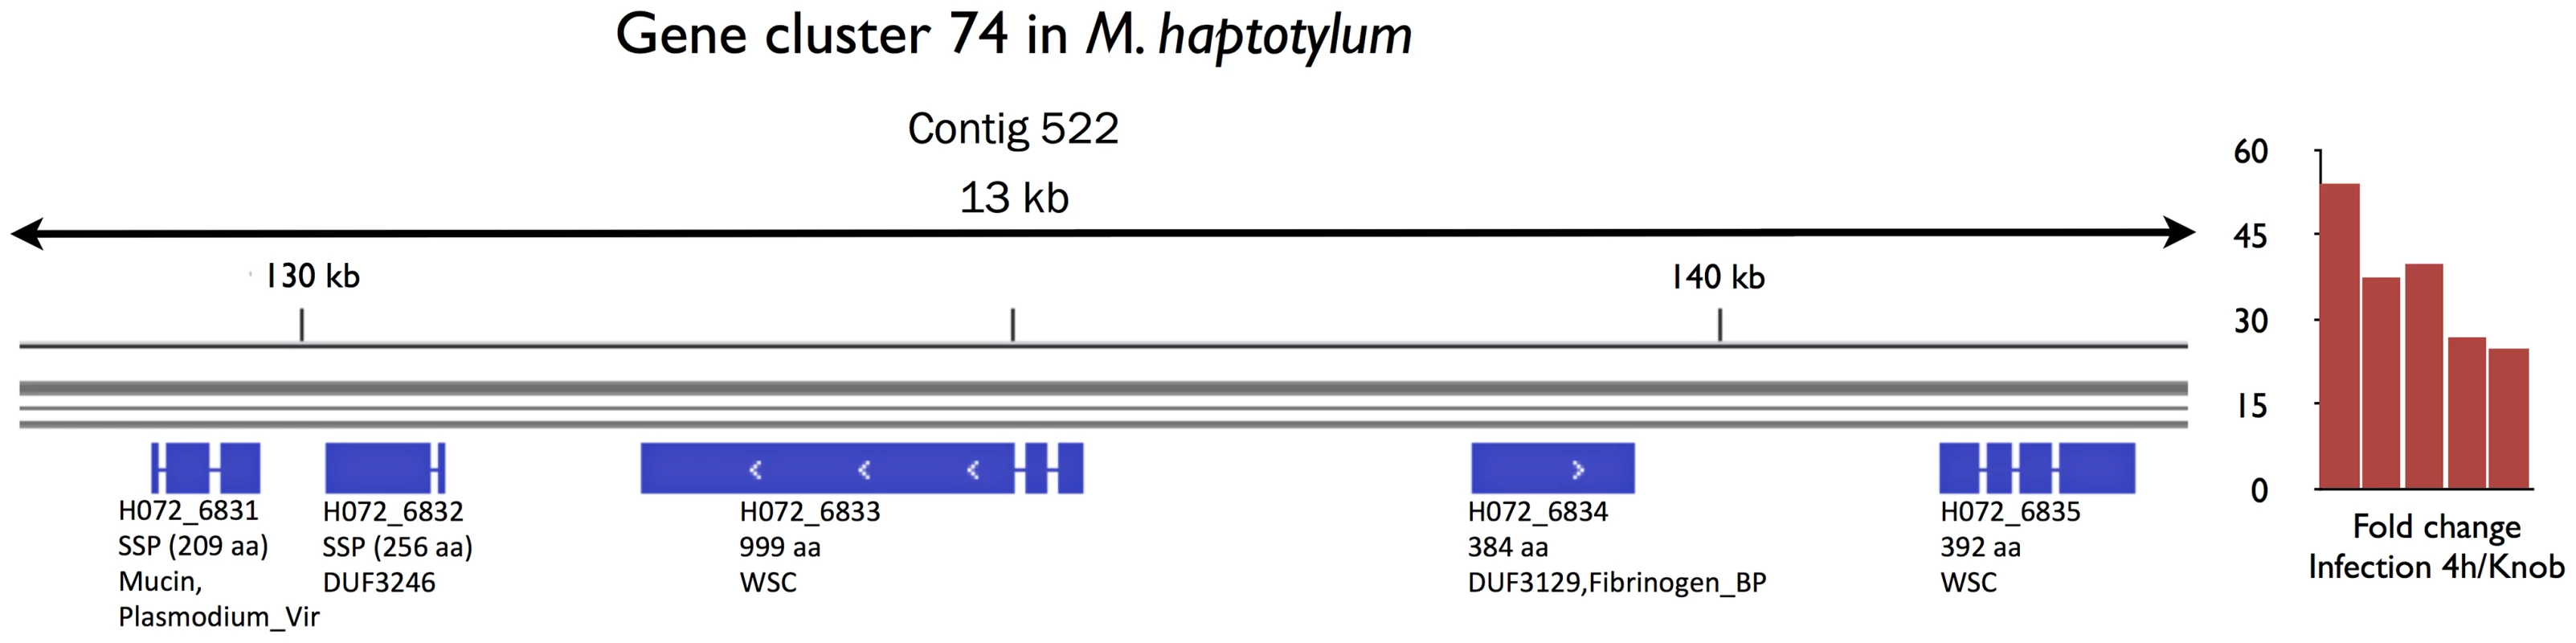 Gene cluster of secreted proteins in <i>M. haptotylum</i> that were highly expressed during nematode infection.